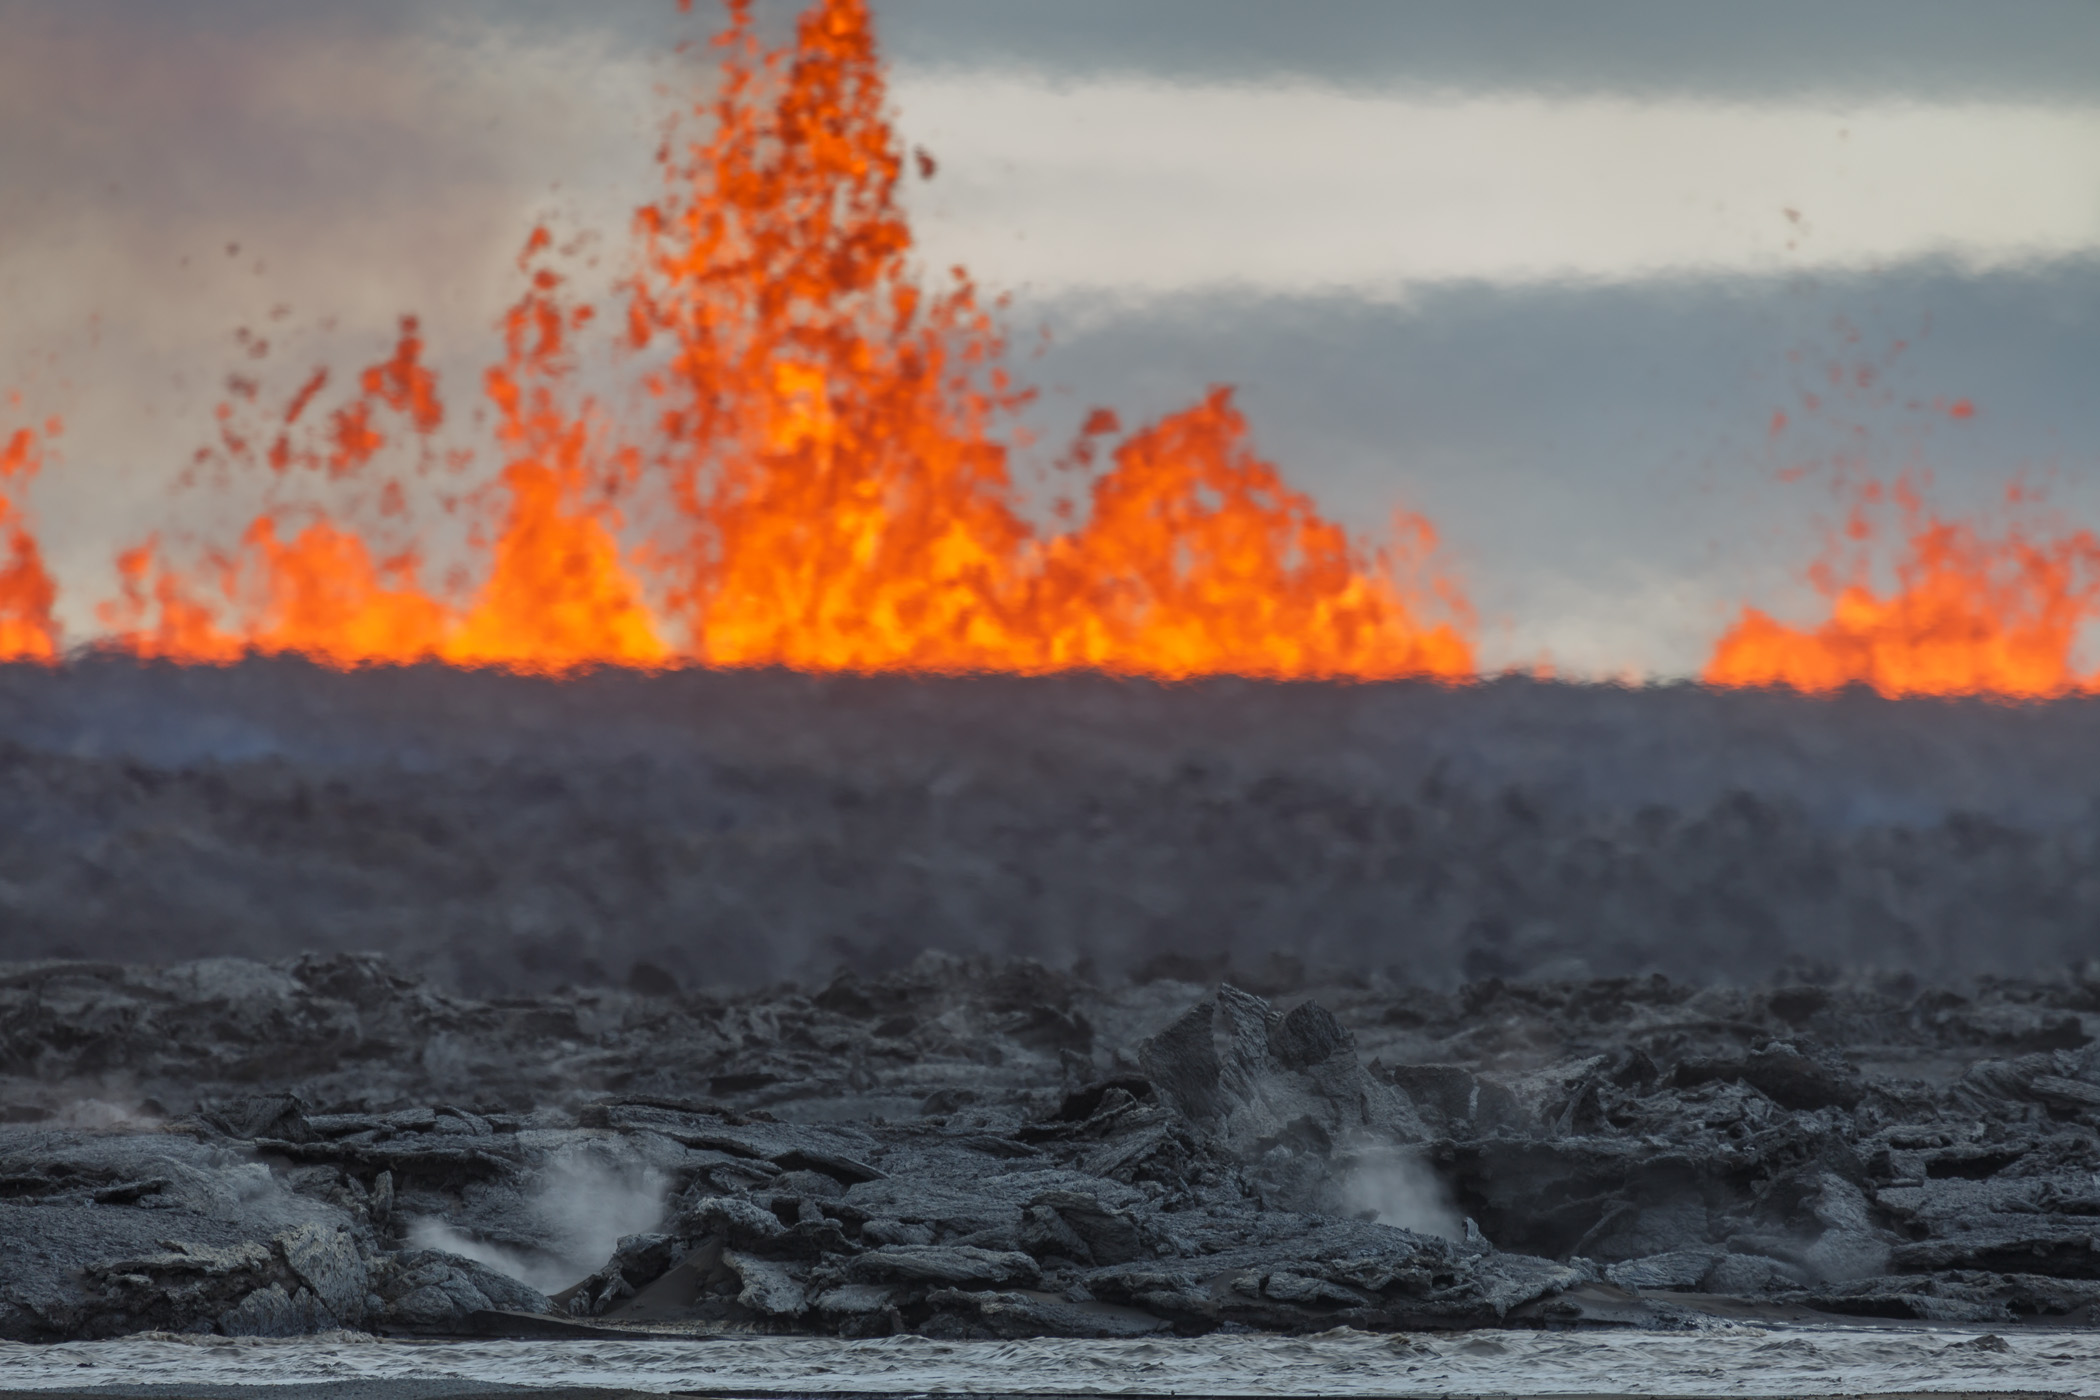 Lava fountain and black lava in the foreground. Bardarbunga / Holuhraun eruption. Iceland Central Highlands 2014.